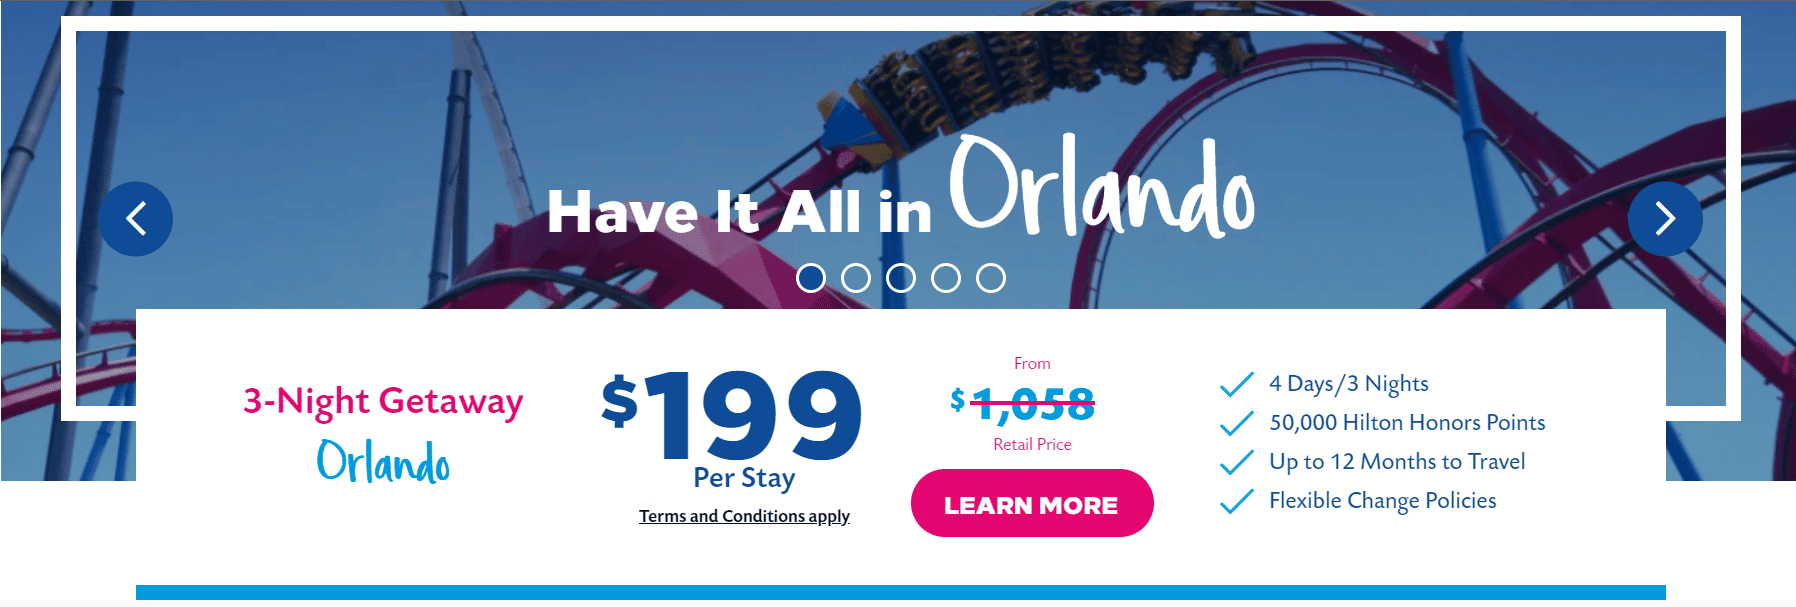 hilton grand vacations increased timeshare offer for orlando promotion